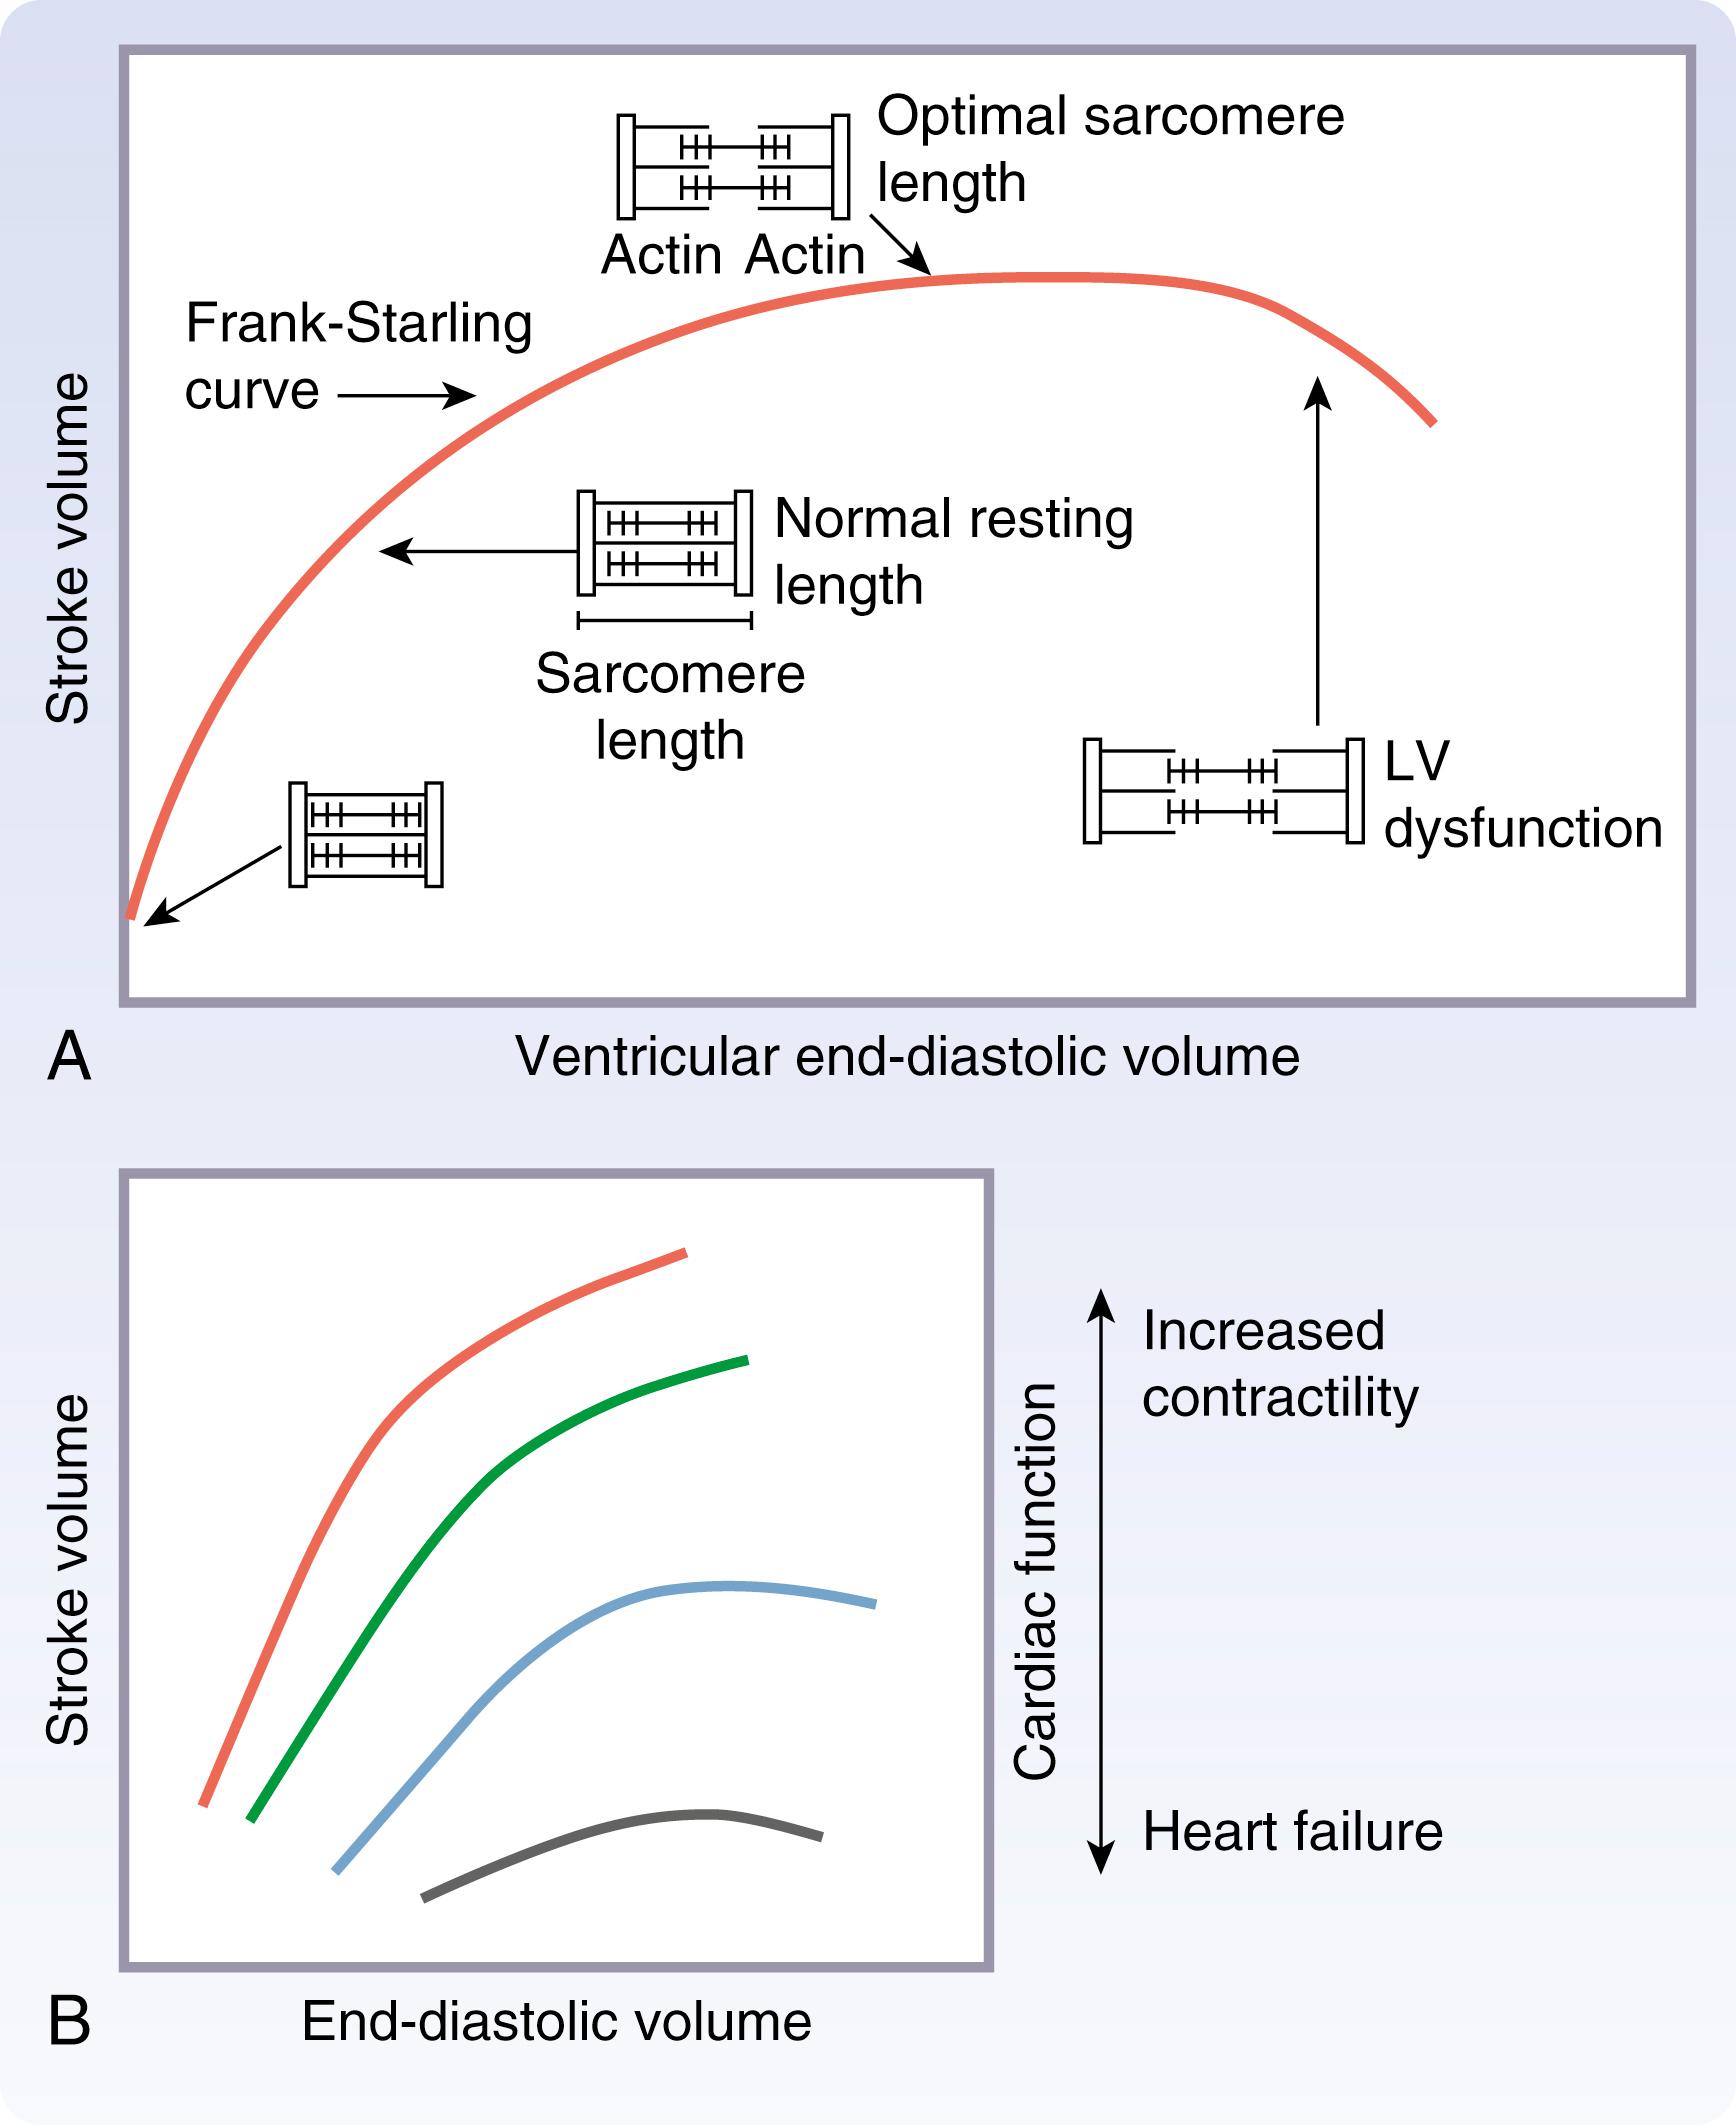 Fig. 61.12, Frank Starling curve. The Frank-Starling law describes a generally linear relationship between increasing end-diastolic volume (EDV), or preload, and generated ventricular pressure. (A) Shifts in volume change generated pressure/stroke volume along a given pressure-volume curve. (B) Cardiomyopathy shifts curve downward.